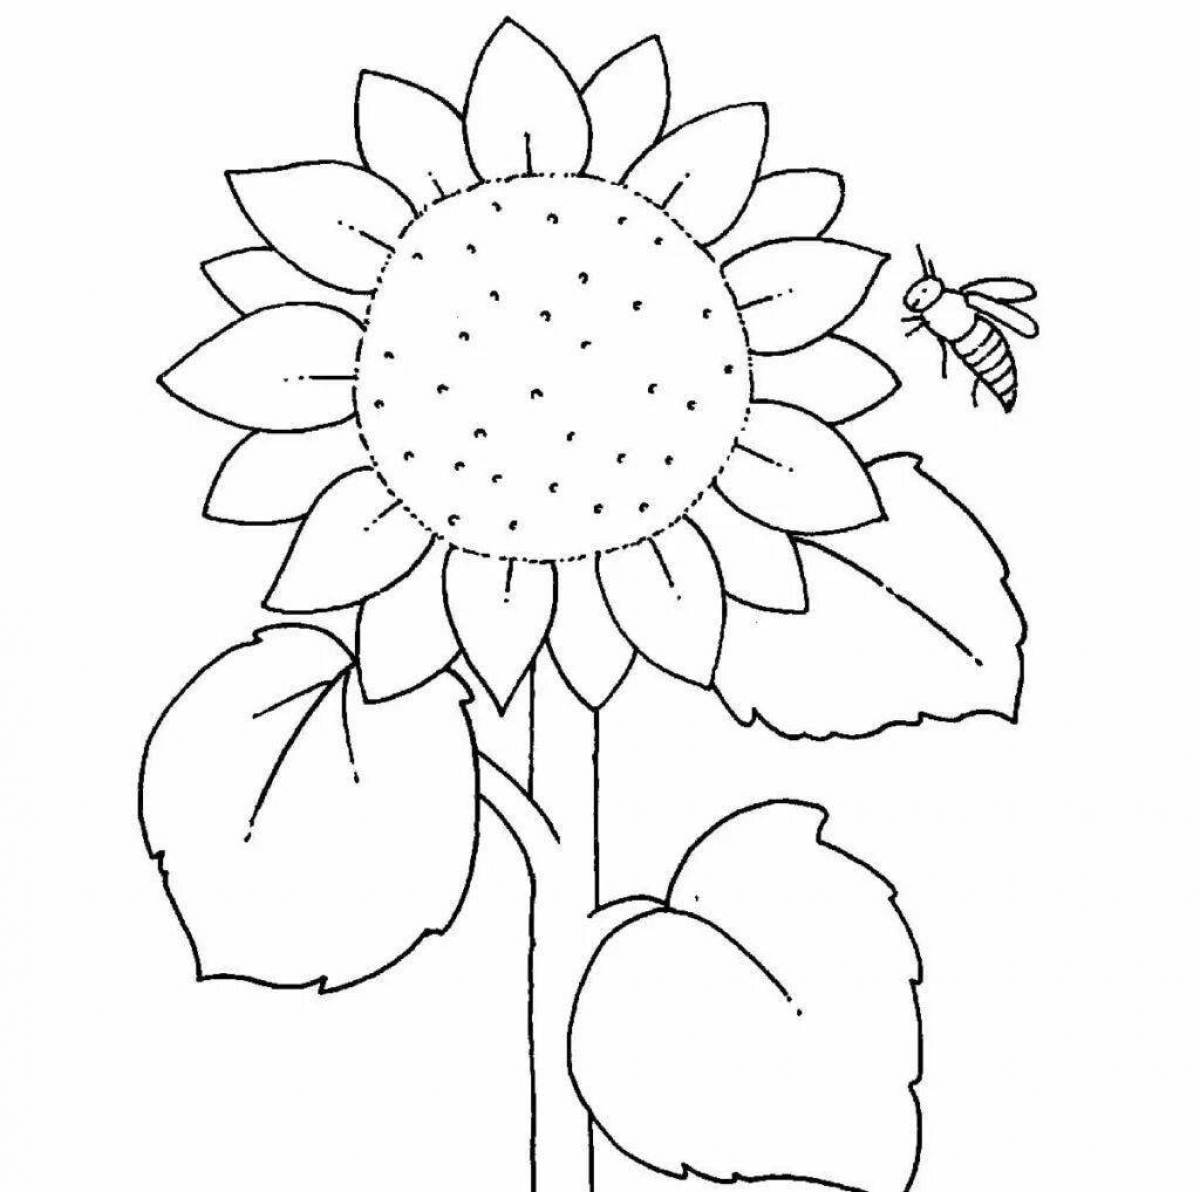 Bright sunflower coloring book for children 2-3 years old